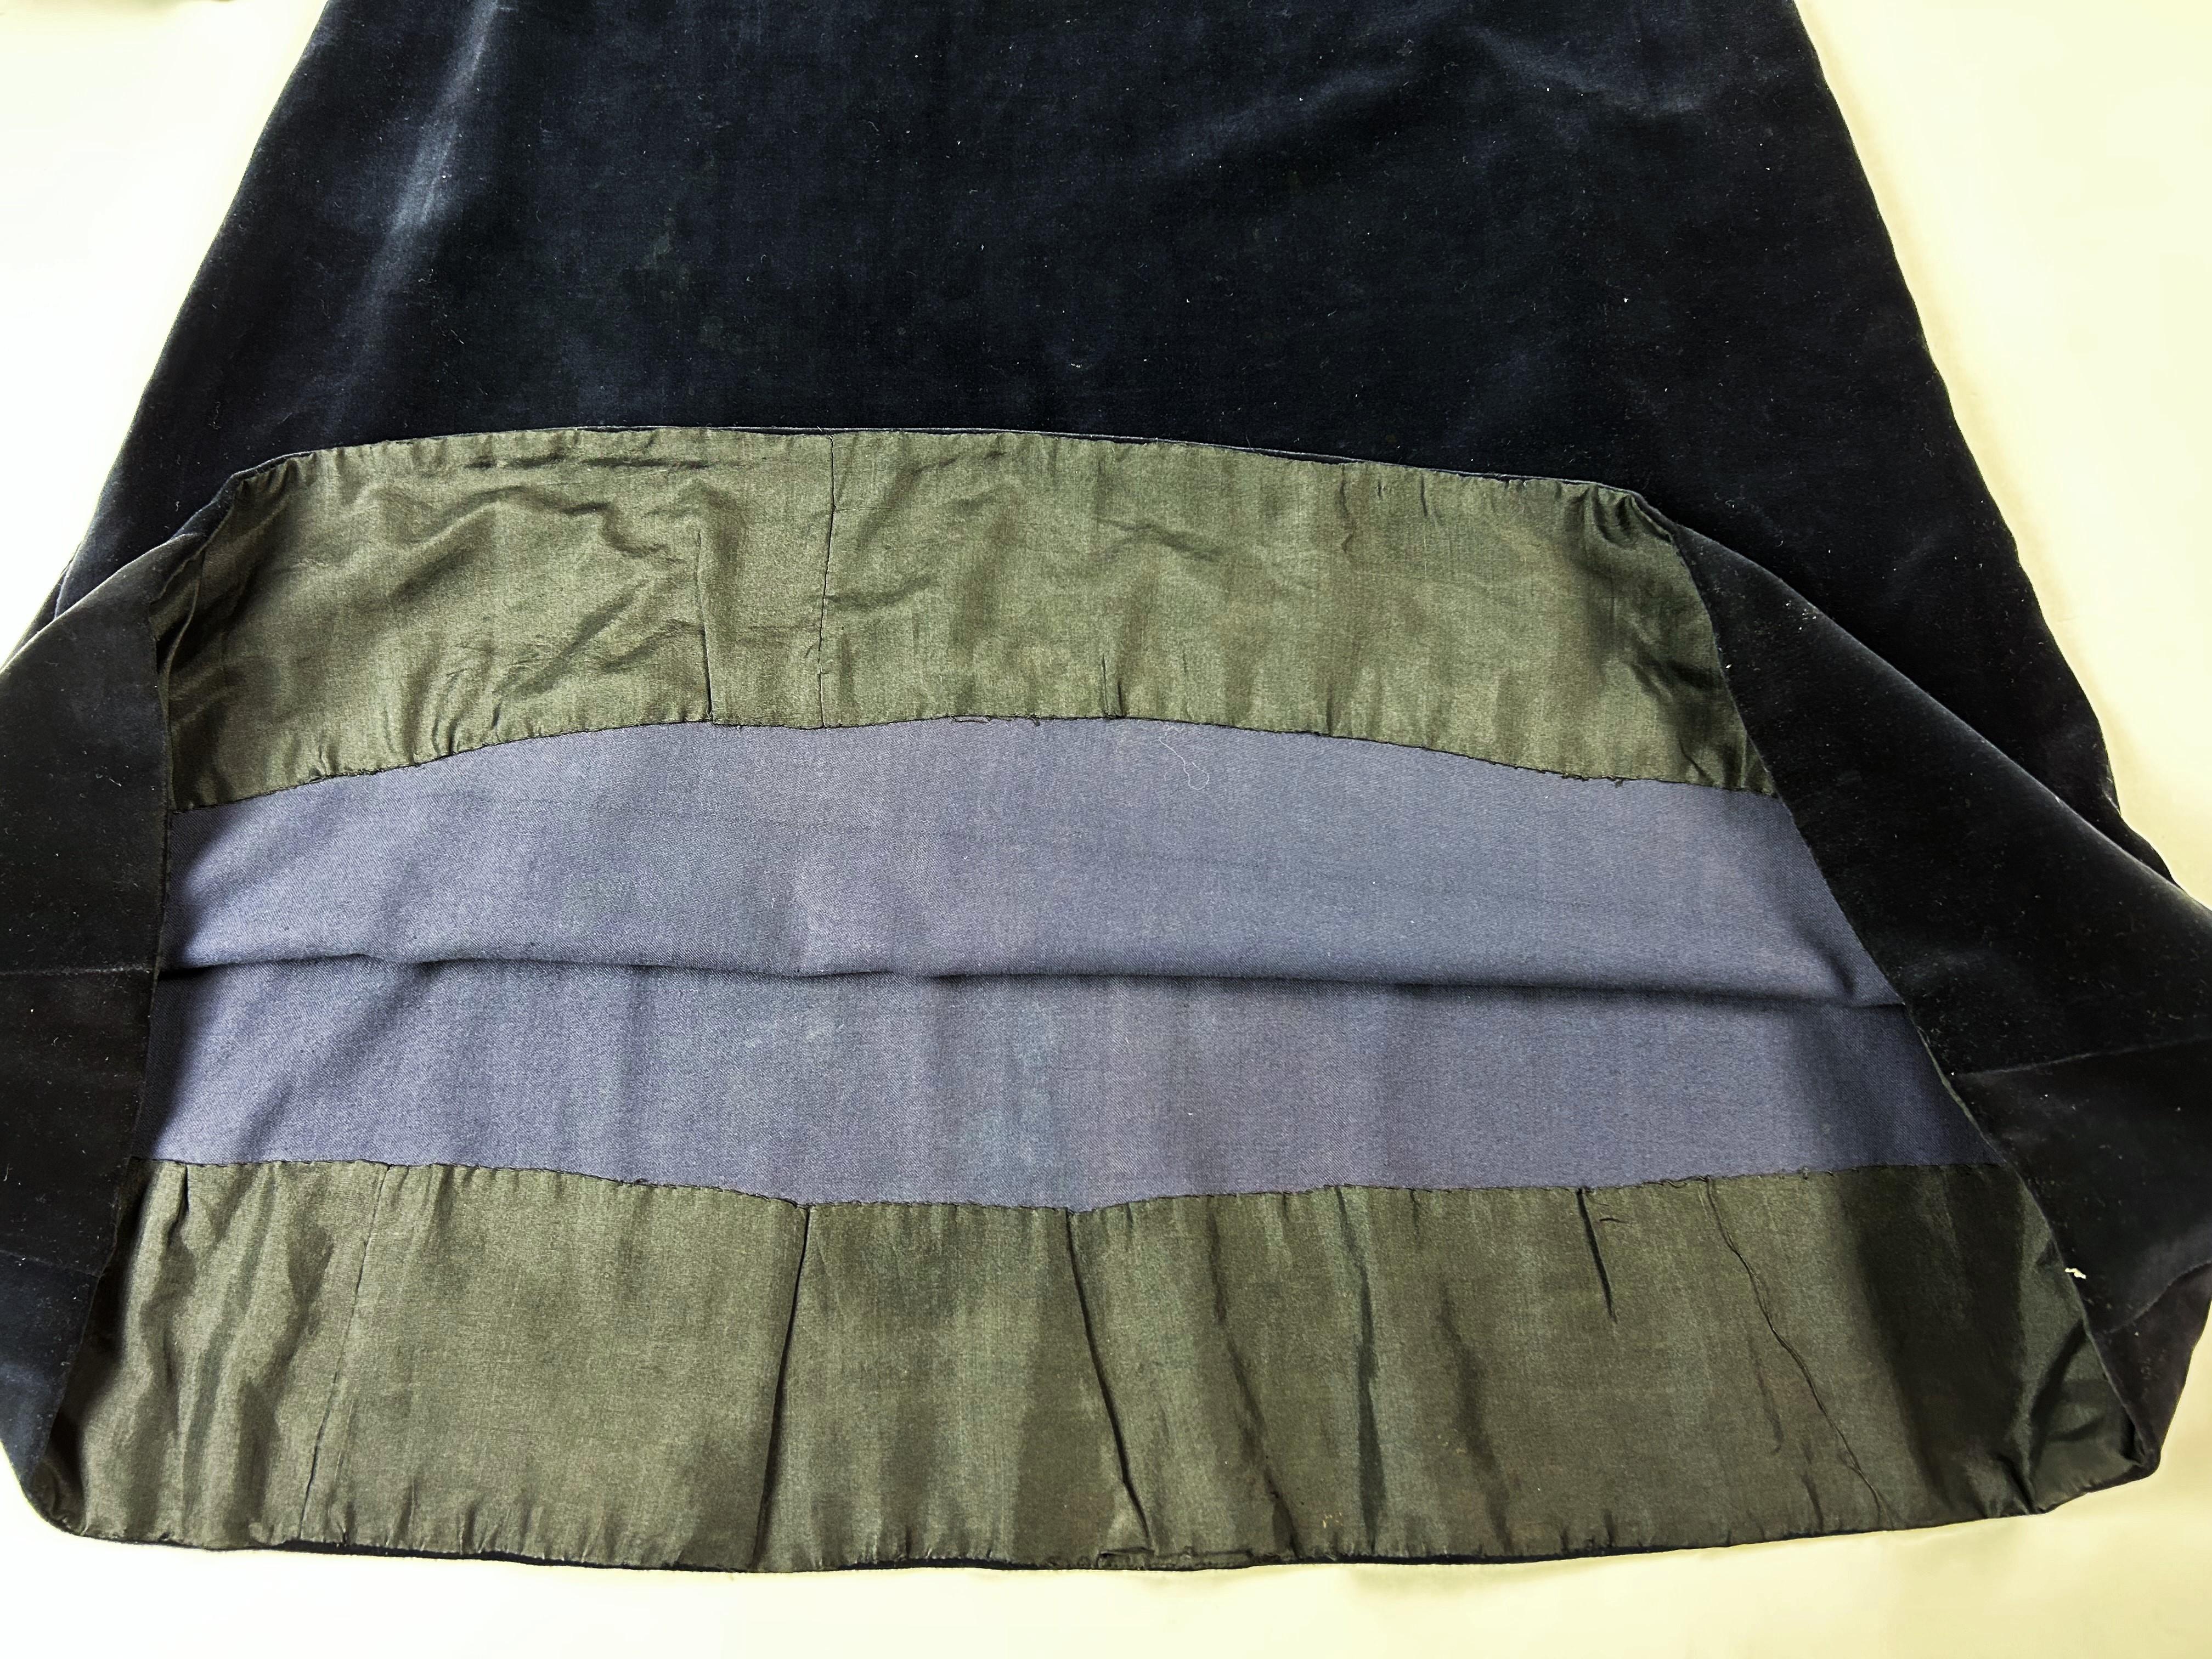 A Navy Velvet Sac Dress with glass beads embroideries - France Circa 1925-1930 For Sale 1